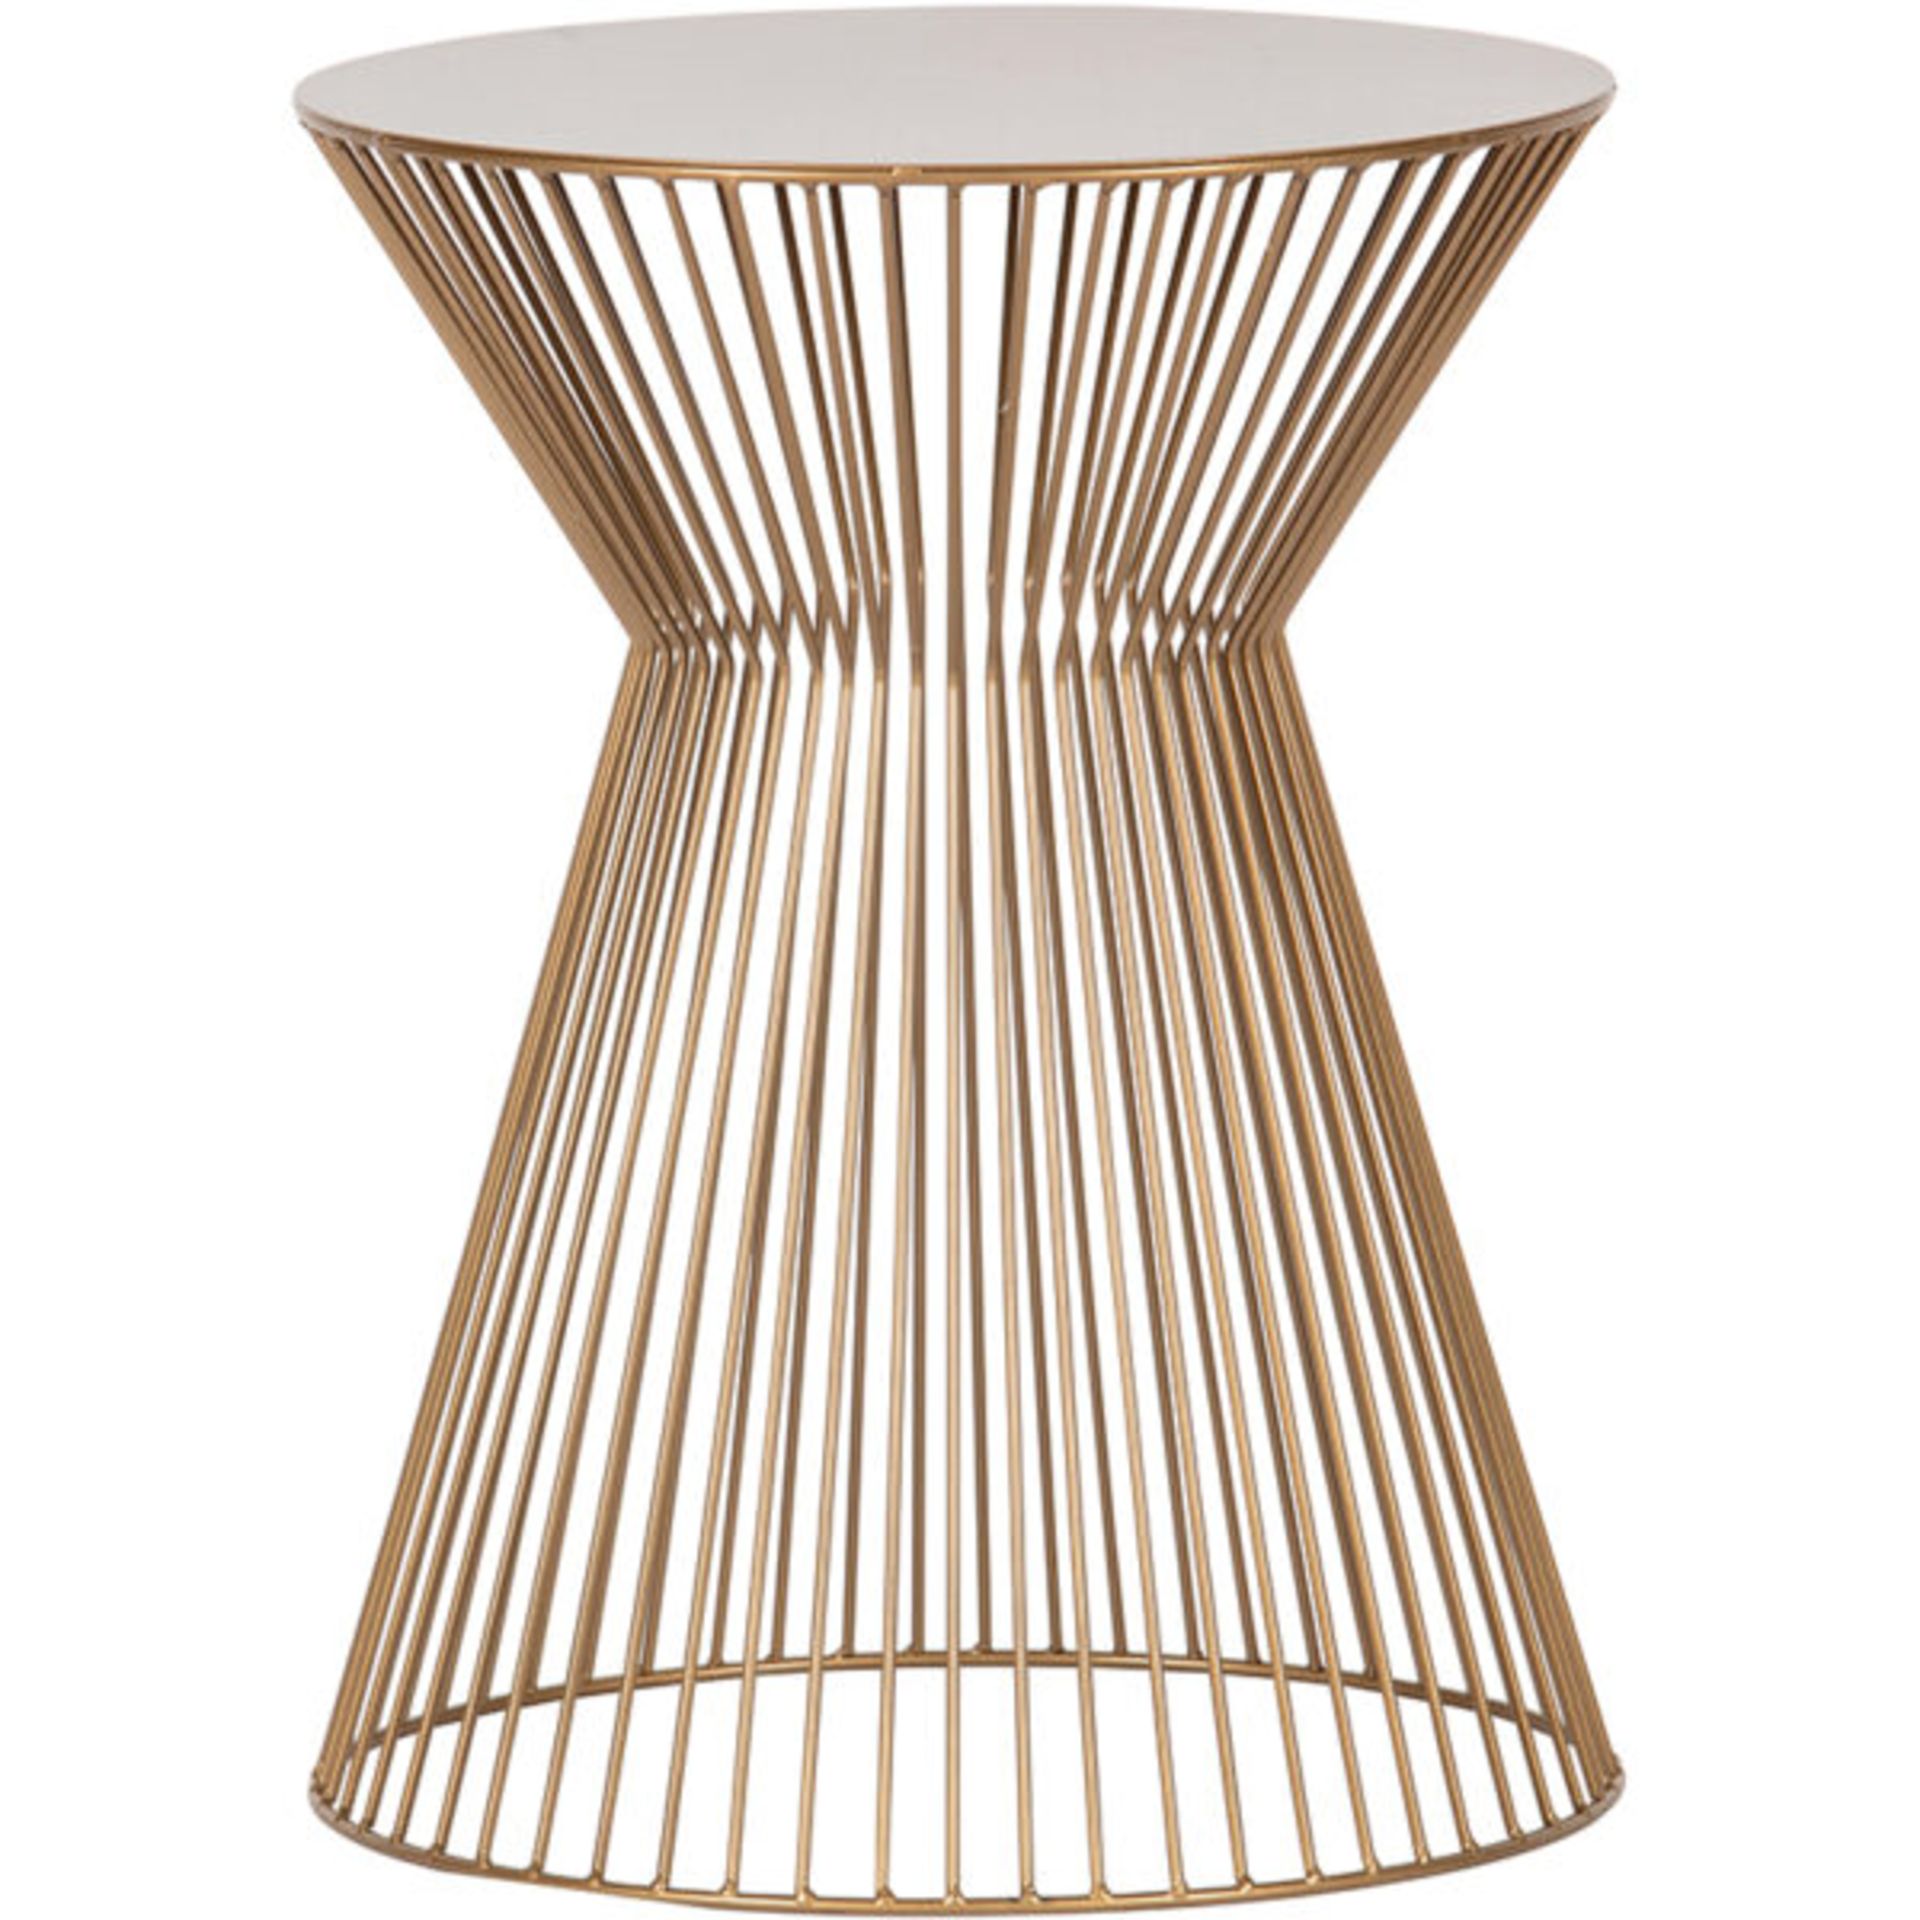 1 x 'Suus' Contemporary Diabalo Style Openwork Metal SIDE Table In GOLD - Brand New Boxed Stock